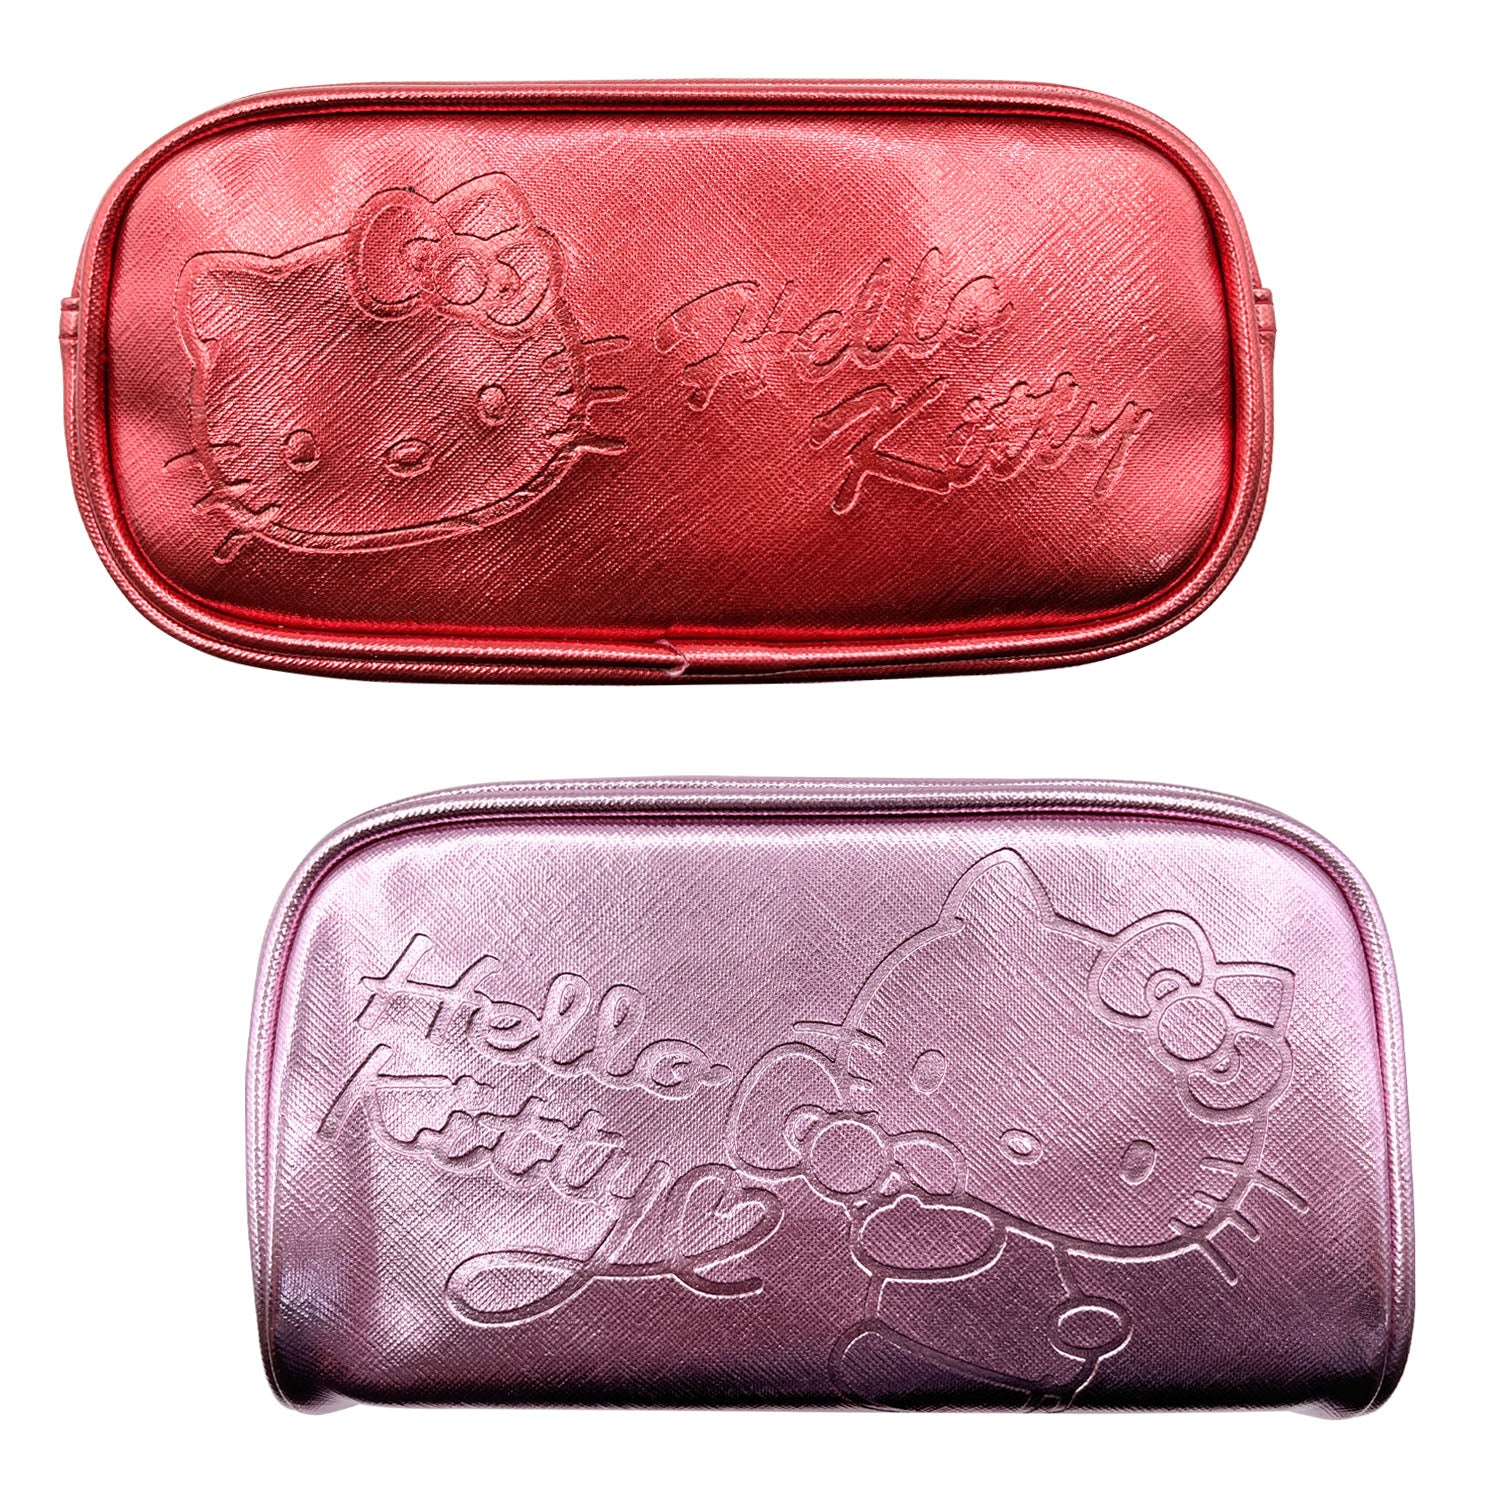 Hello Kitty Pencil Pouch, Engraving Design with Metallic Colors – Bensia